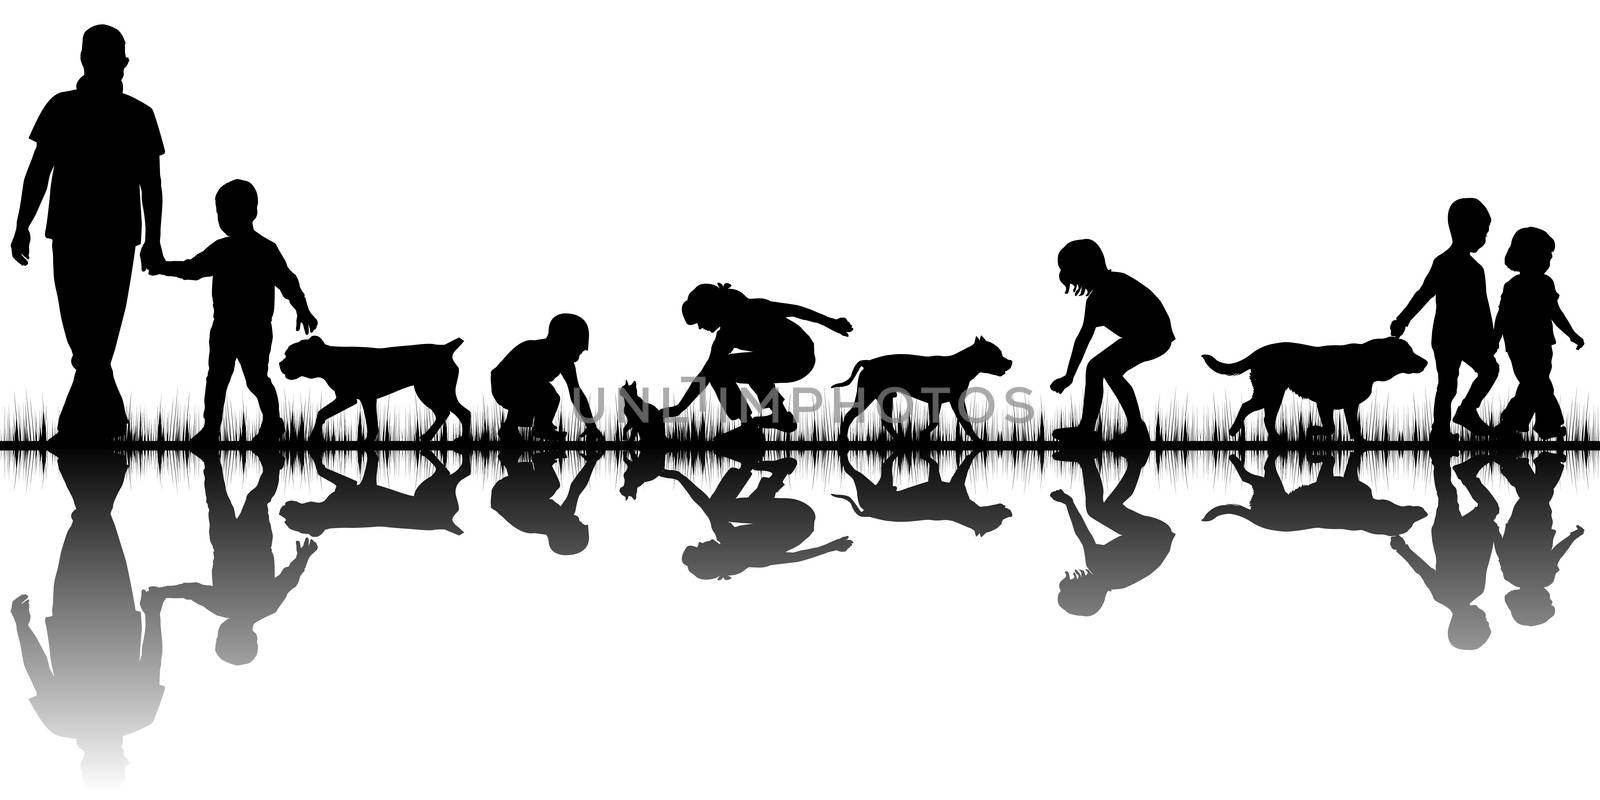 I love animals concept with silhouettes of people and animals by hibrida13